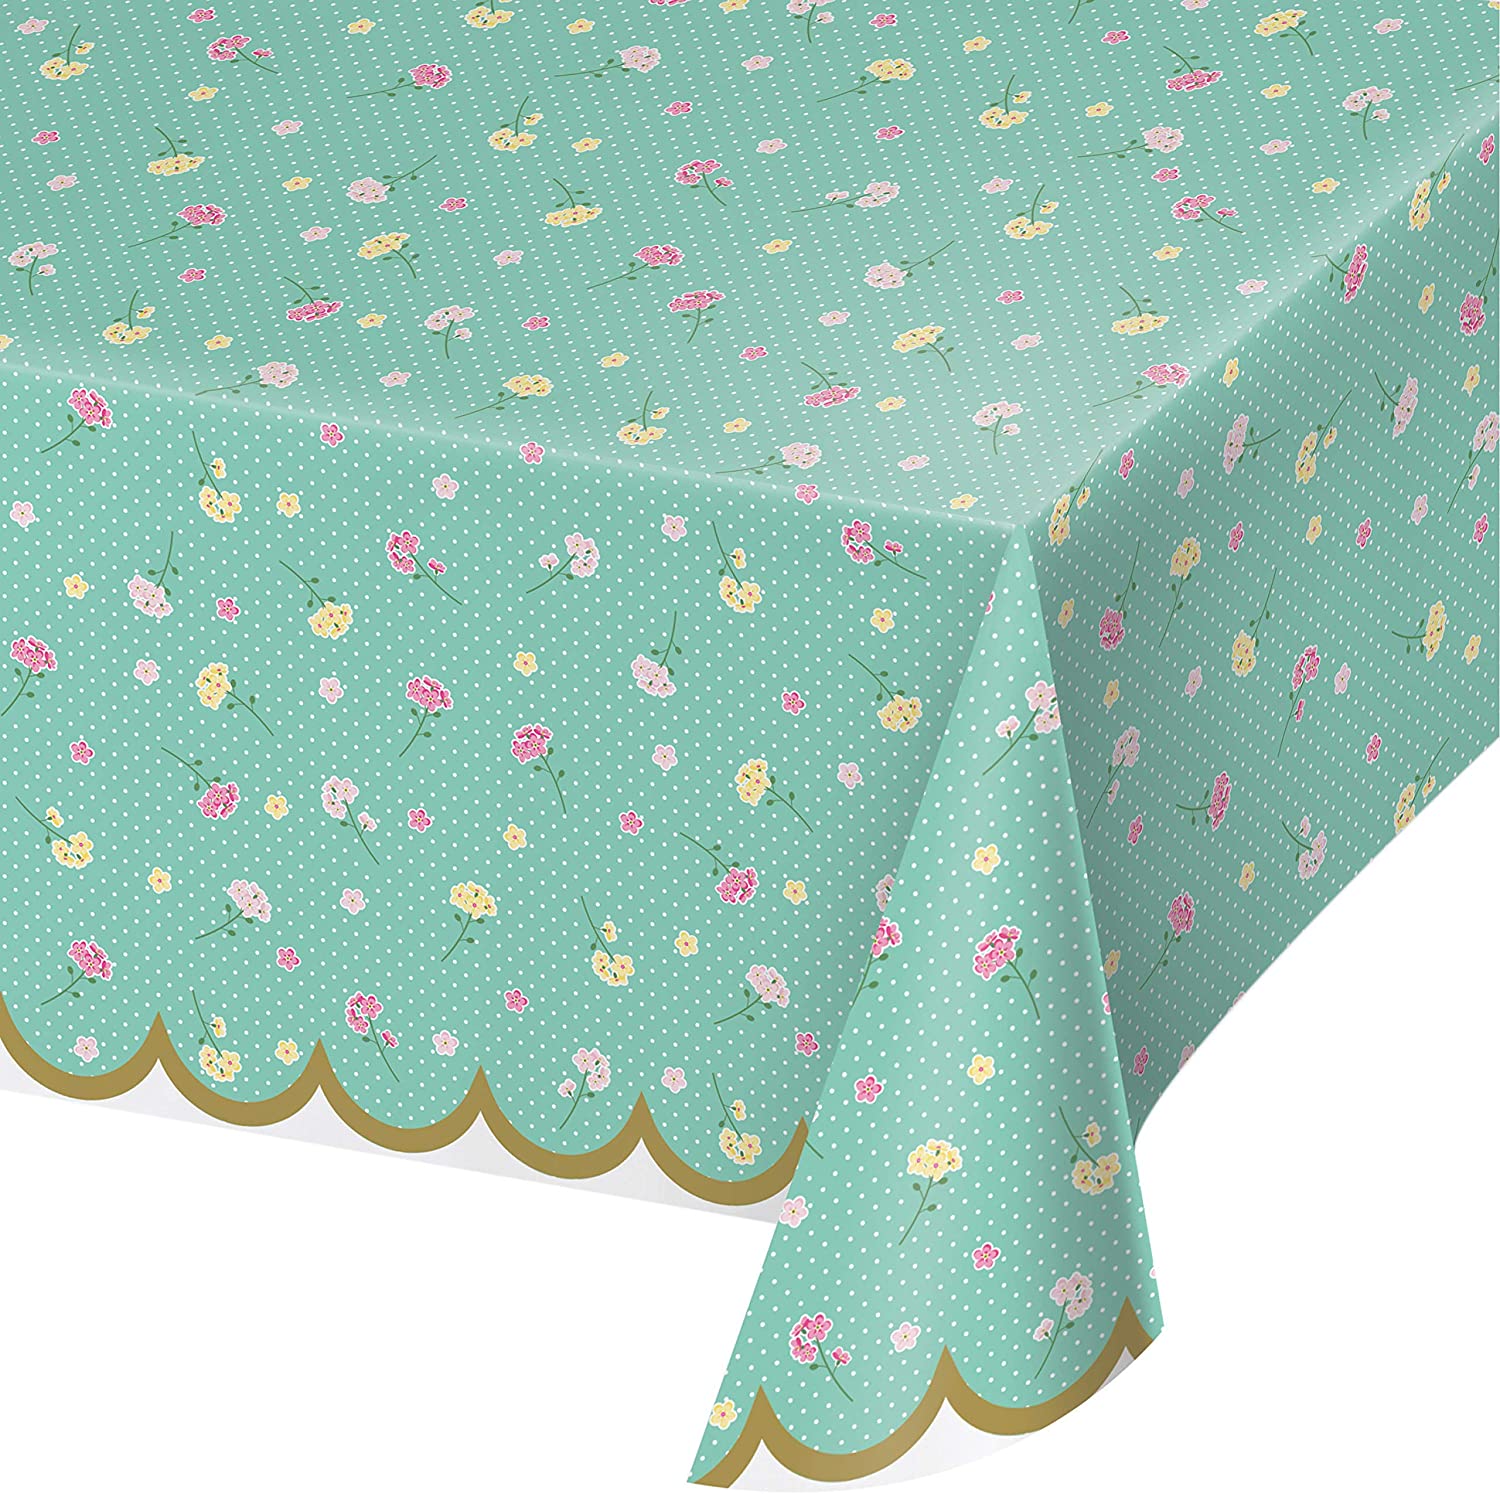 tea-party-ideas-for-kids-tablecloth